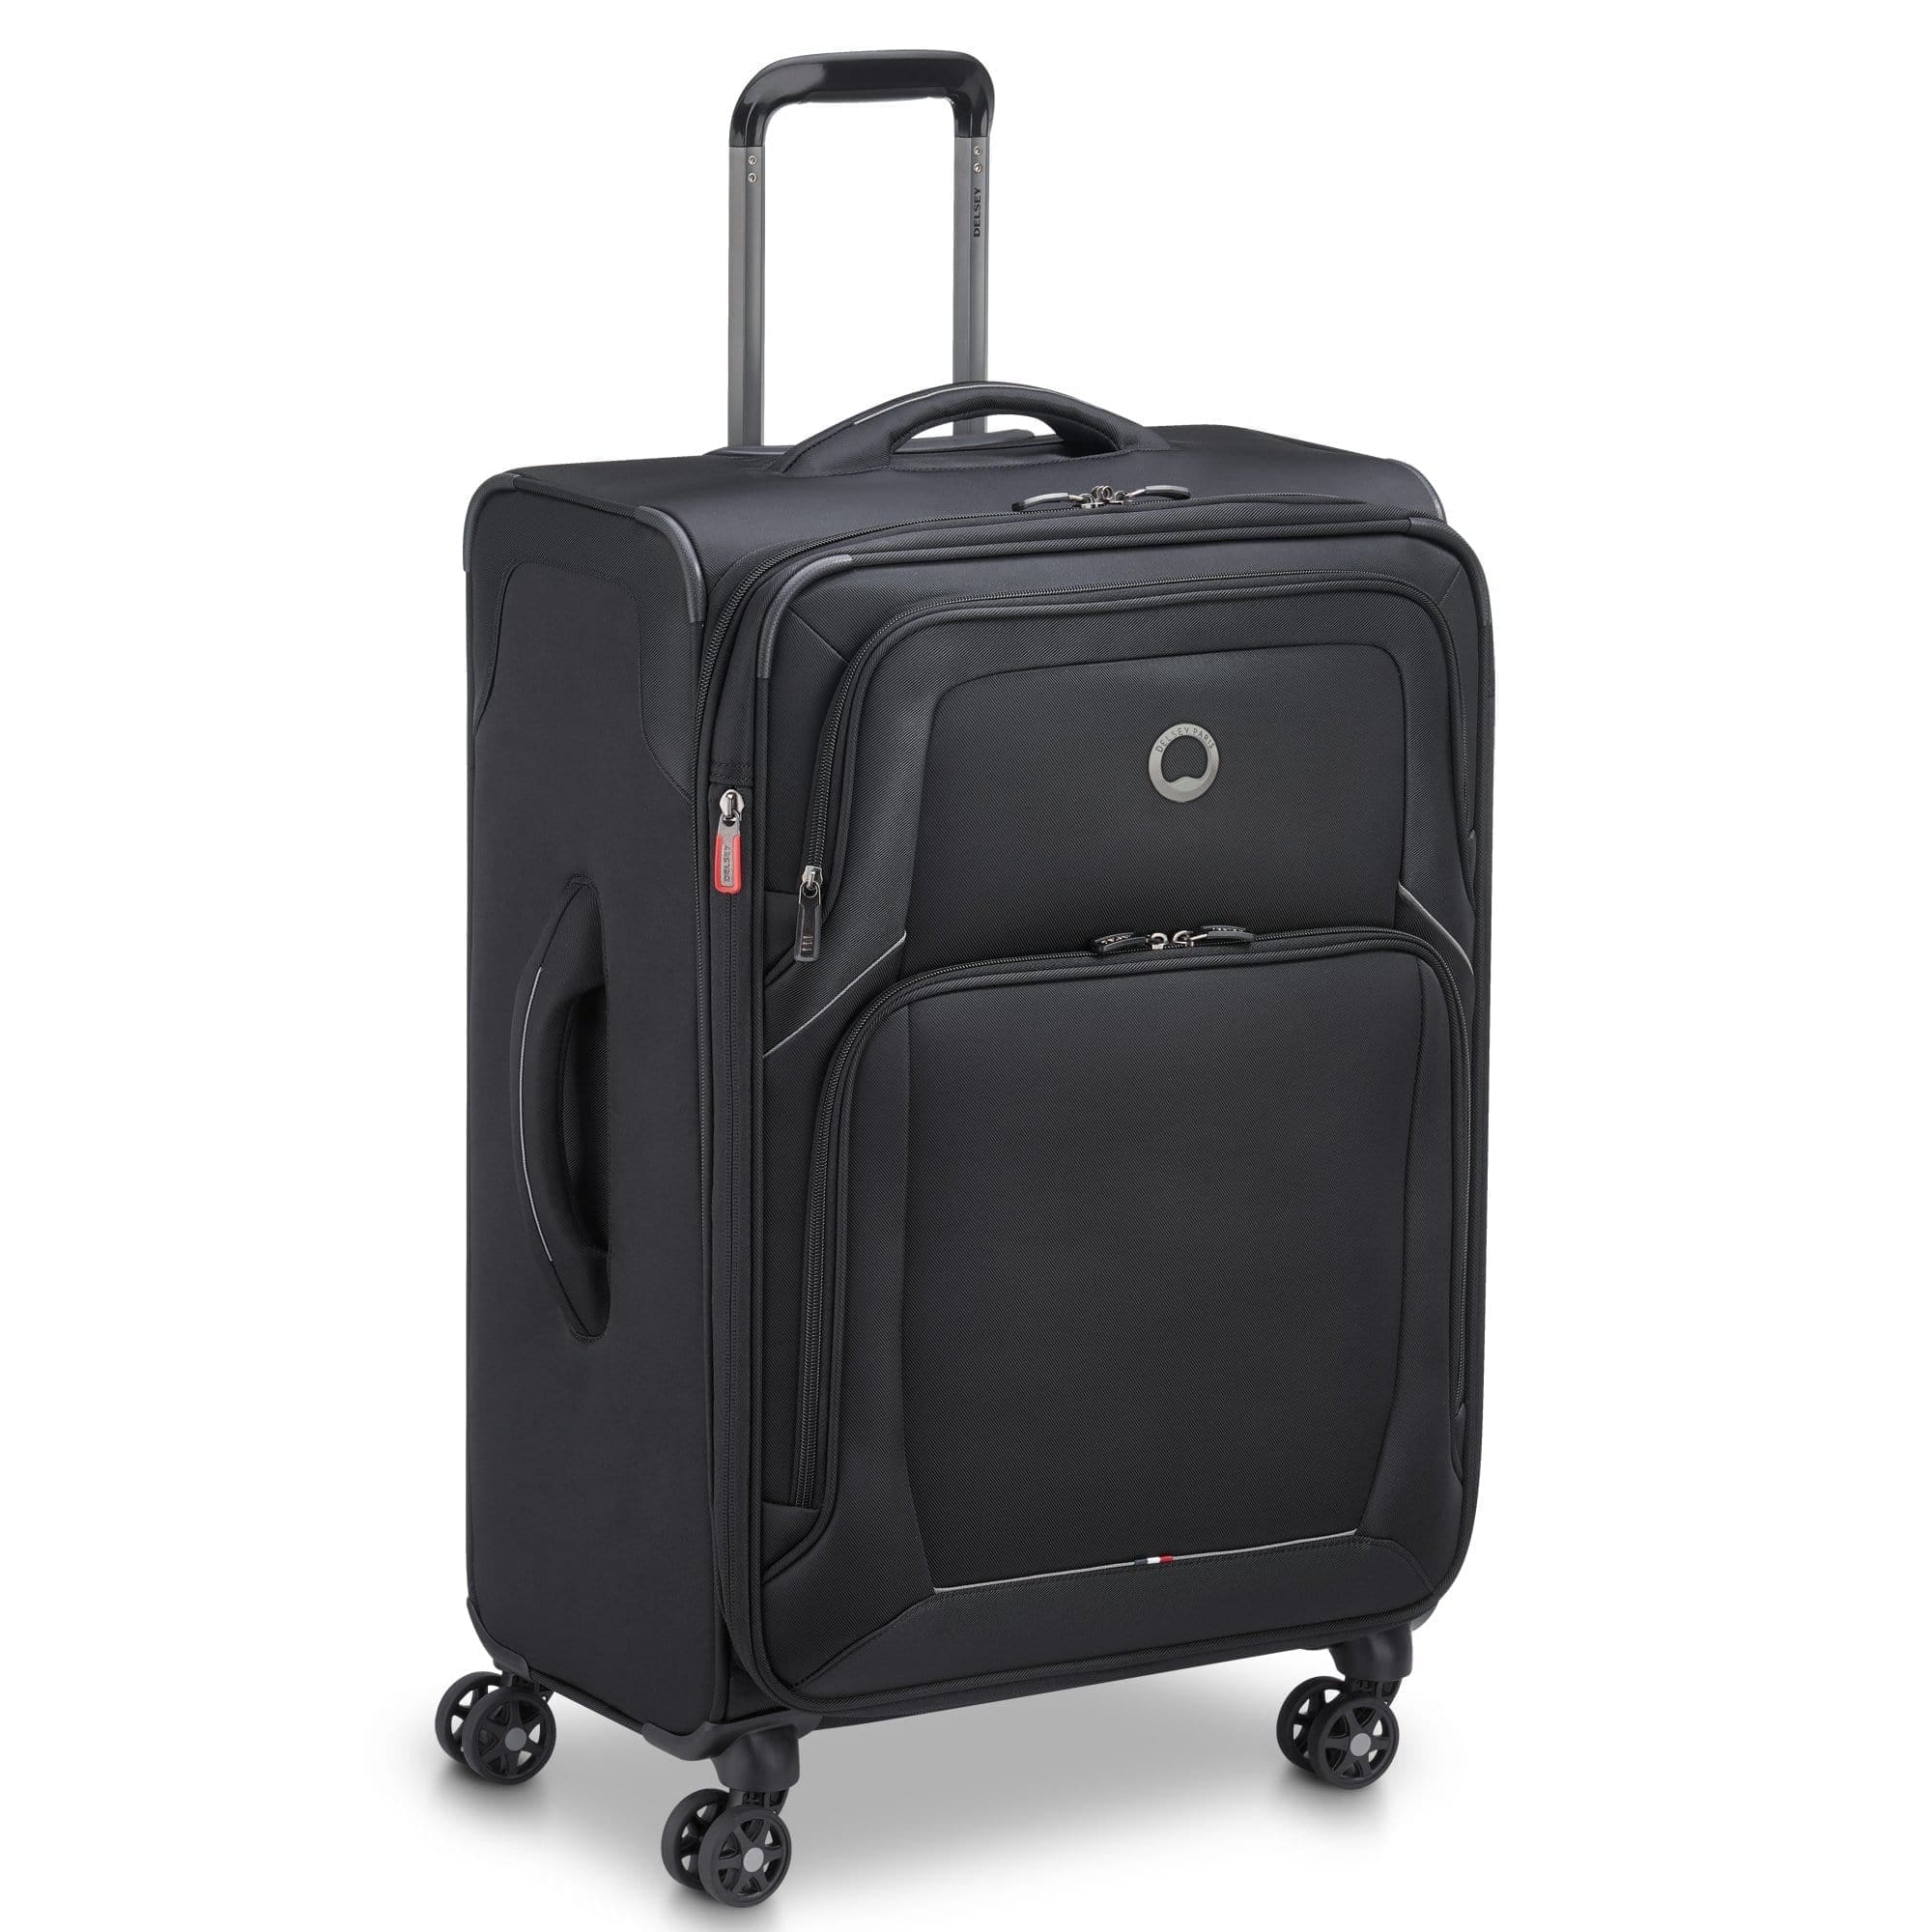 delsey-optimax-lite-70cm-softcase-4-double-wheel-expandable-check-in-luggage-trolley-black-00328582000t9-1.jpg